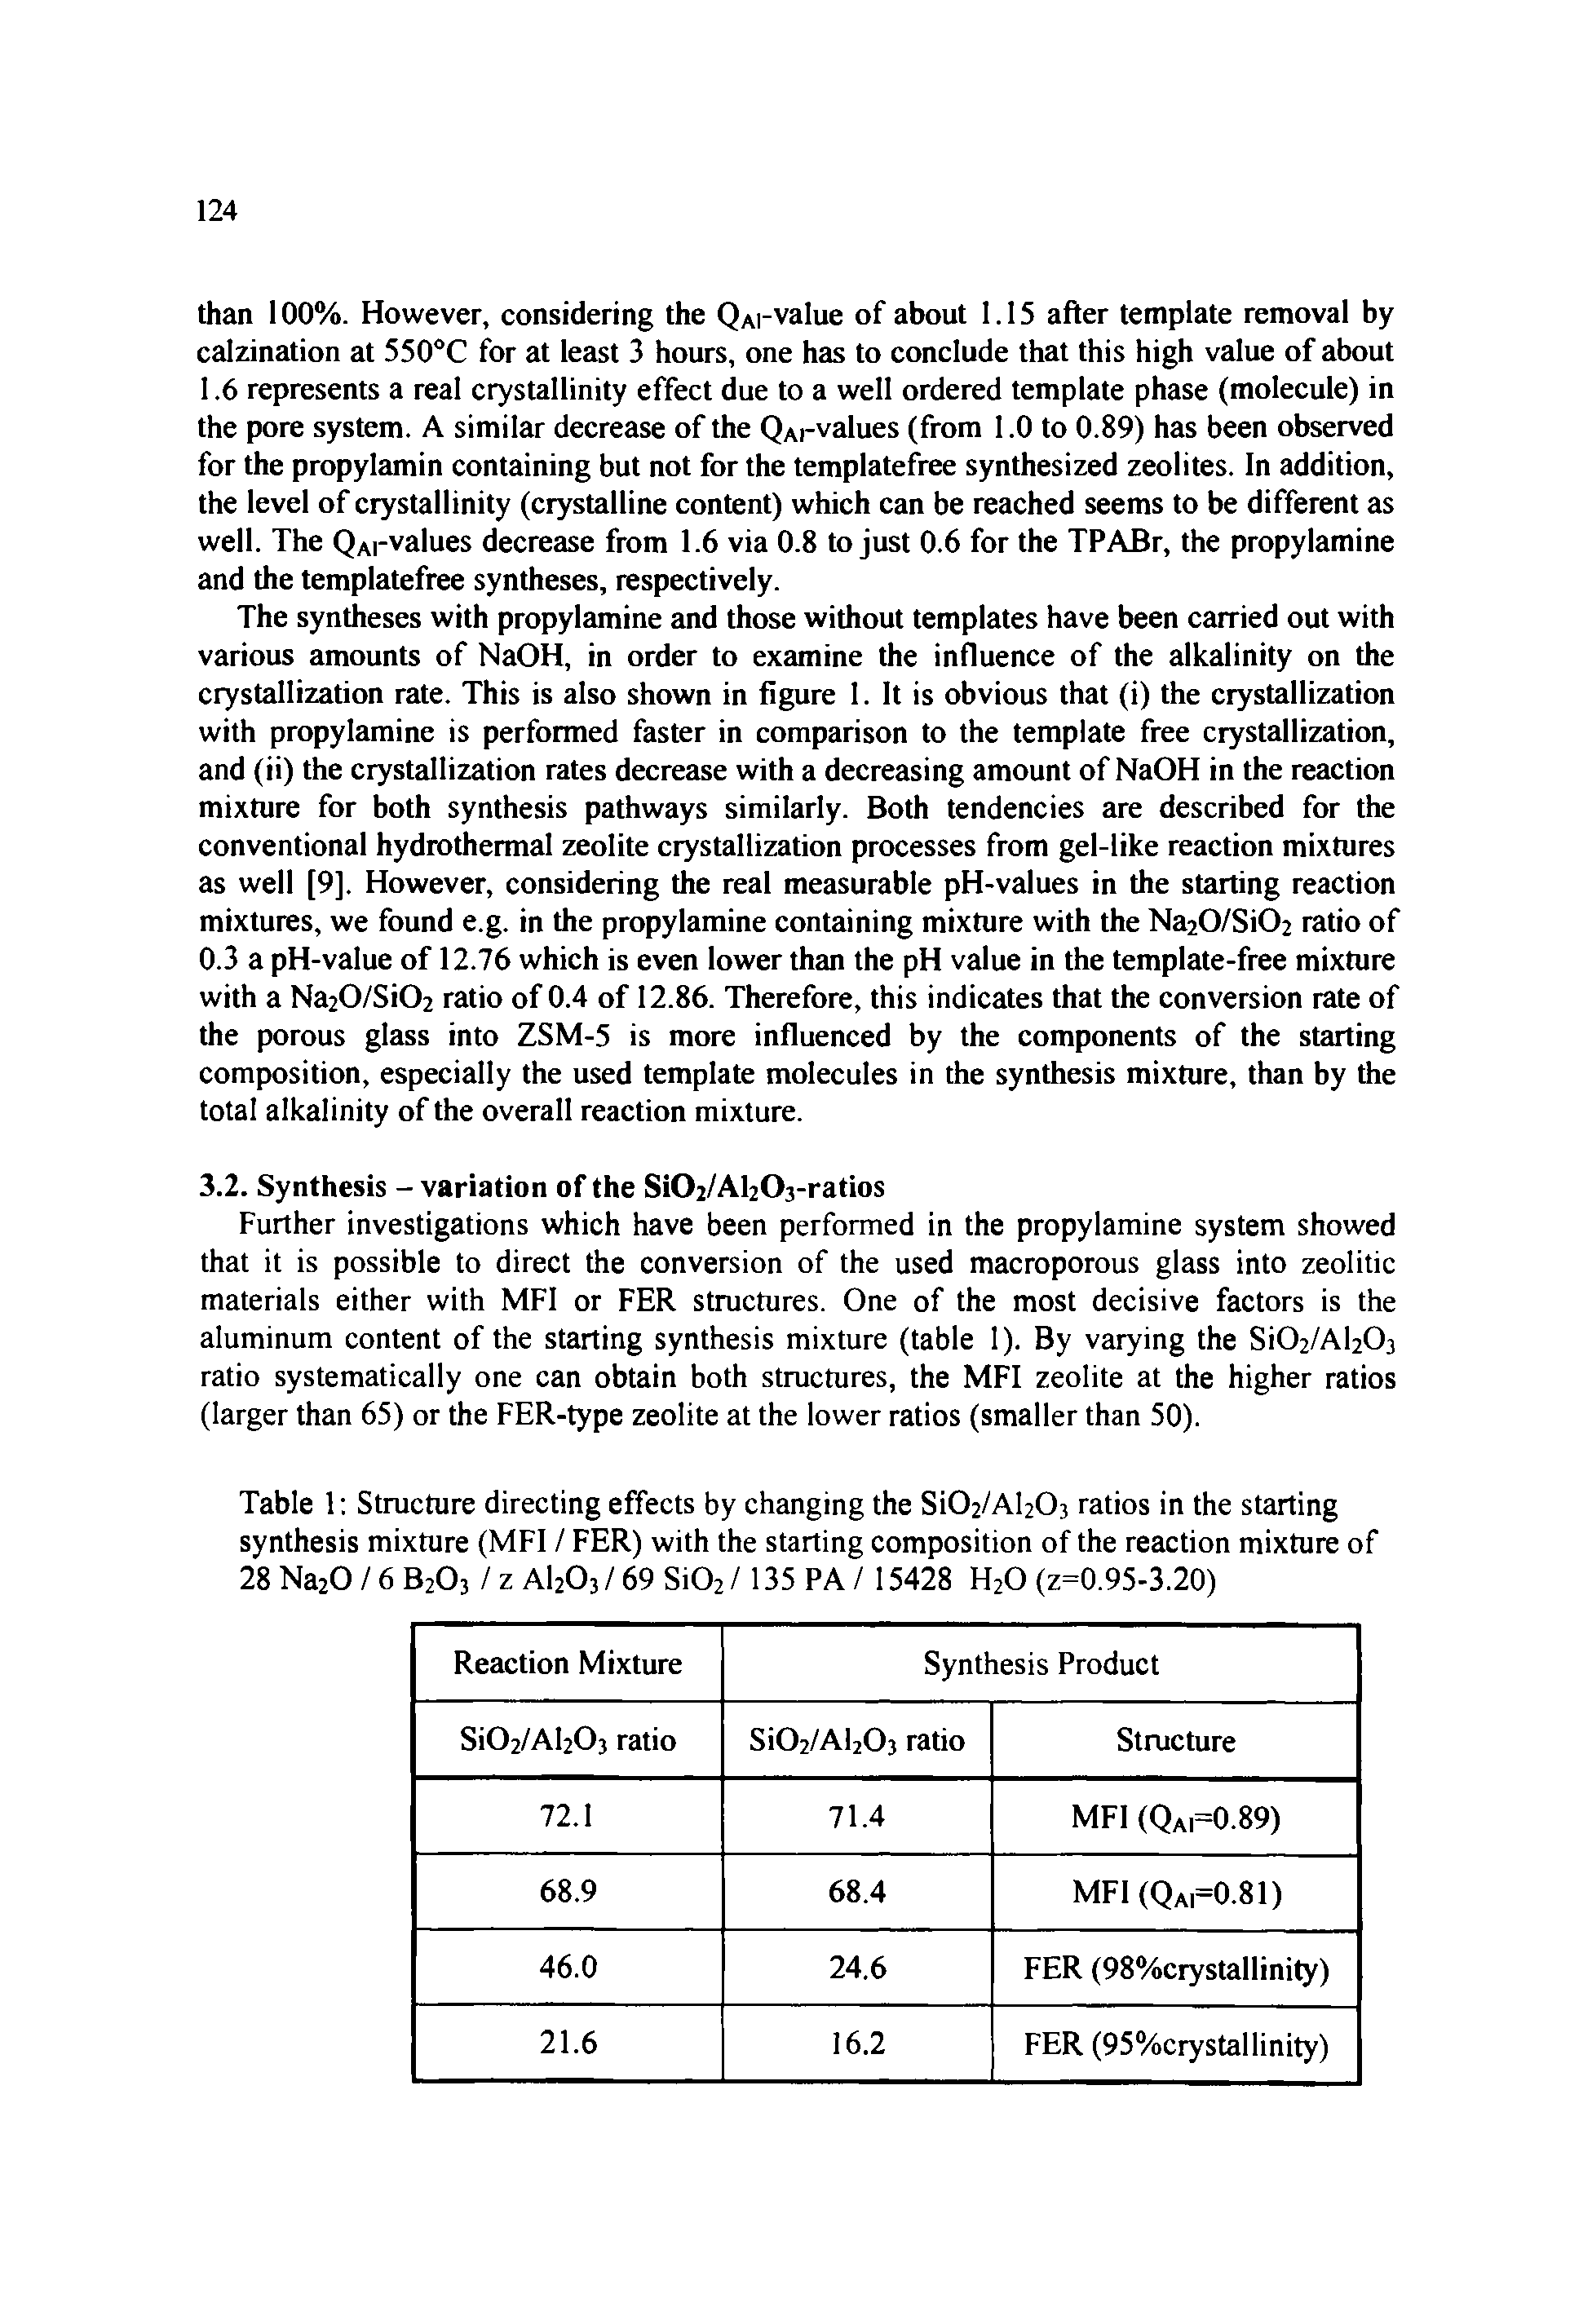 Table 1 Structure directing effects by changing the Si02/Al203 ratios in the starting synthesis mixture (MFI / FER) with the starting composition of the reaction mixture of 28 Na20 / 6 B203 / z Al203 / 69 Si02 / 135 PA / 15428 H20 (z=0.95-3.20)...